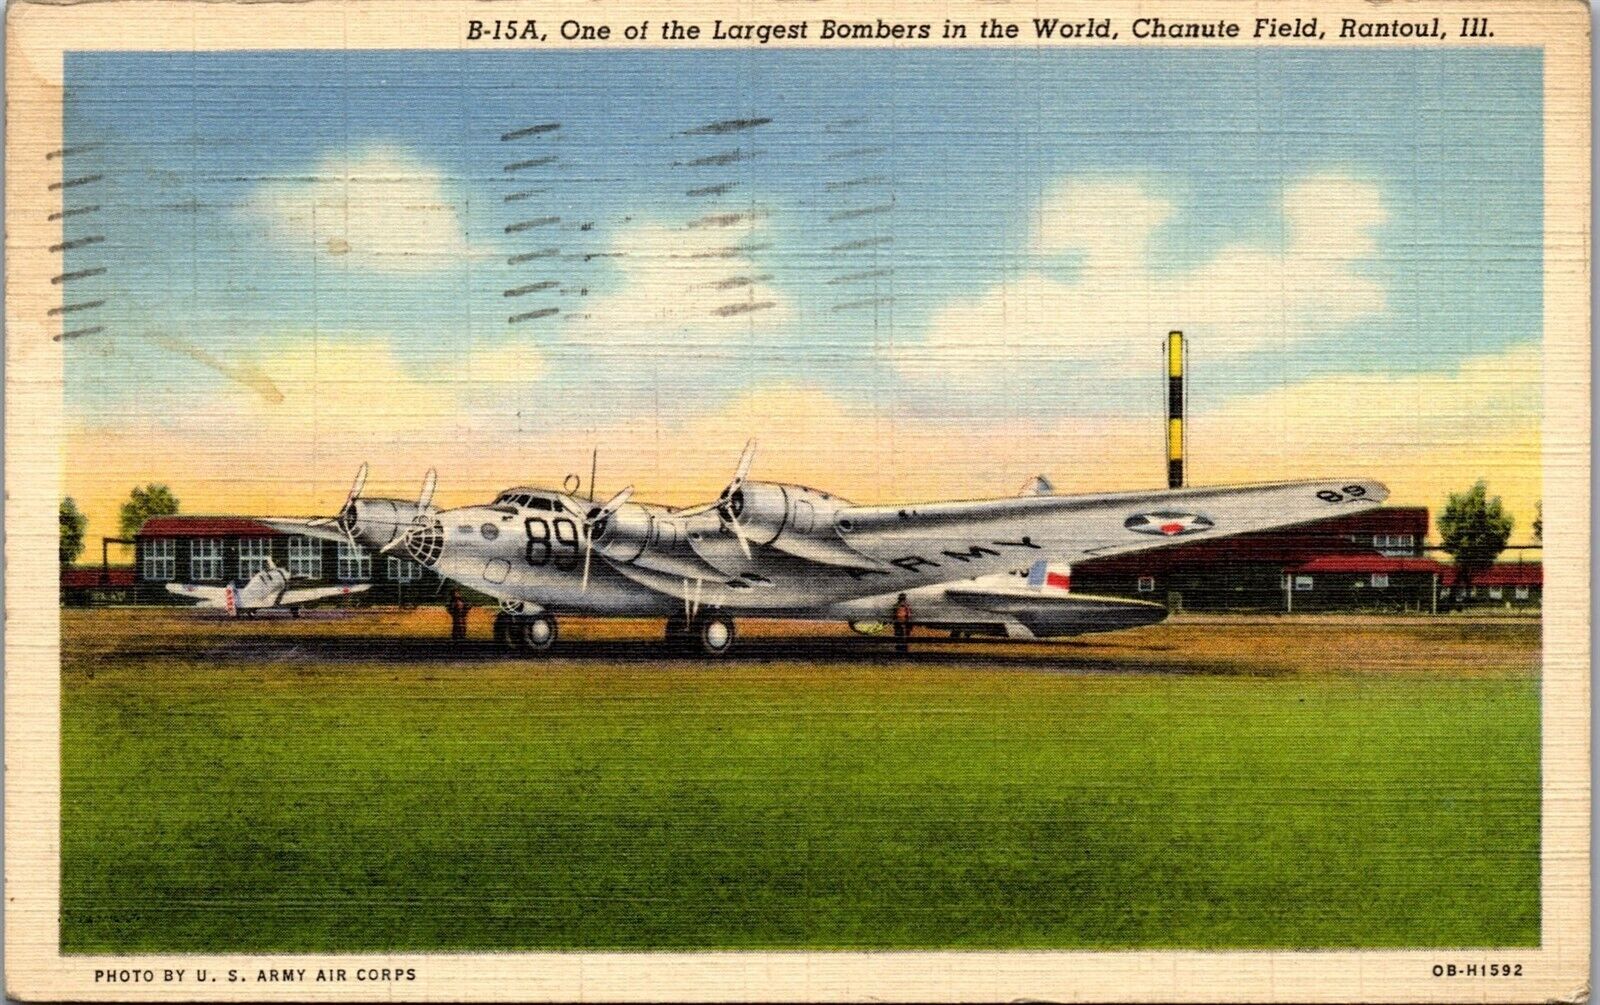 VTG WWII Military Airplane Postcard Largest Bomber Chanute Field Rantoul IL 1943